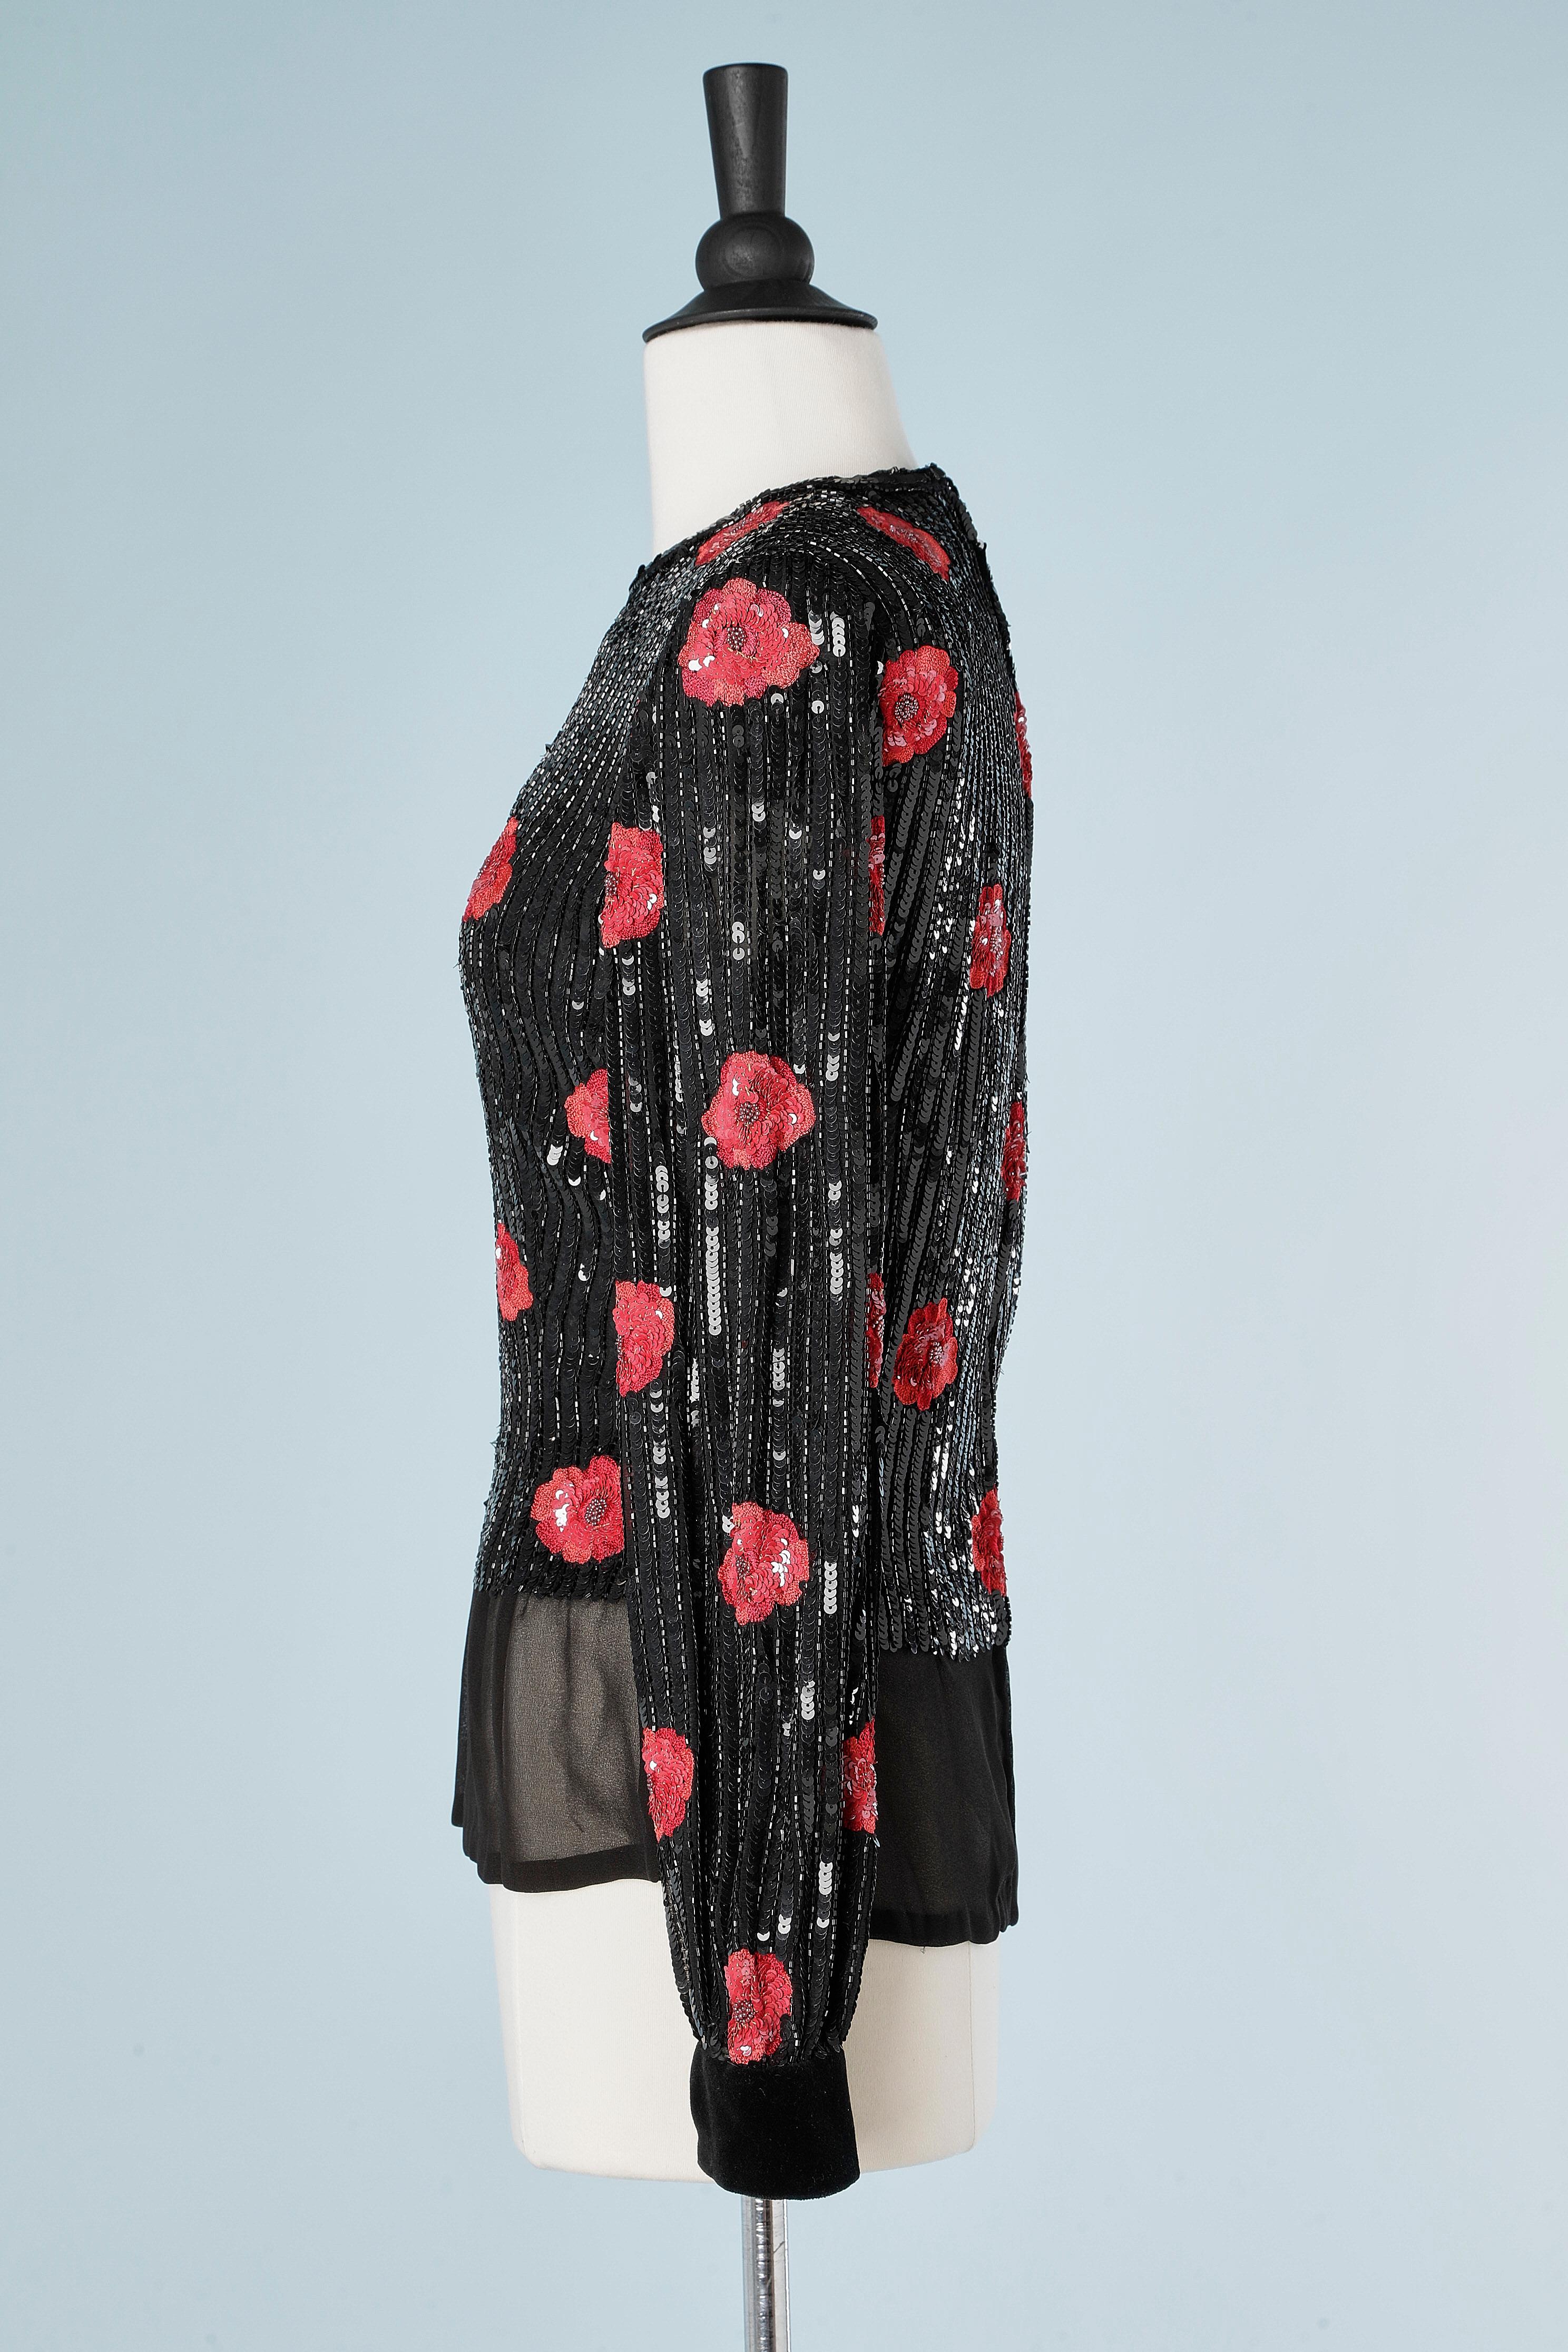 Women's Evening top in black sequins and red flowers embroidered André Laug For Sale